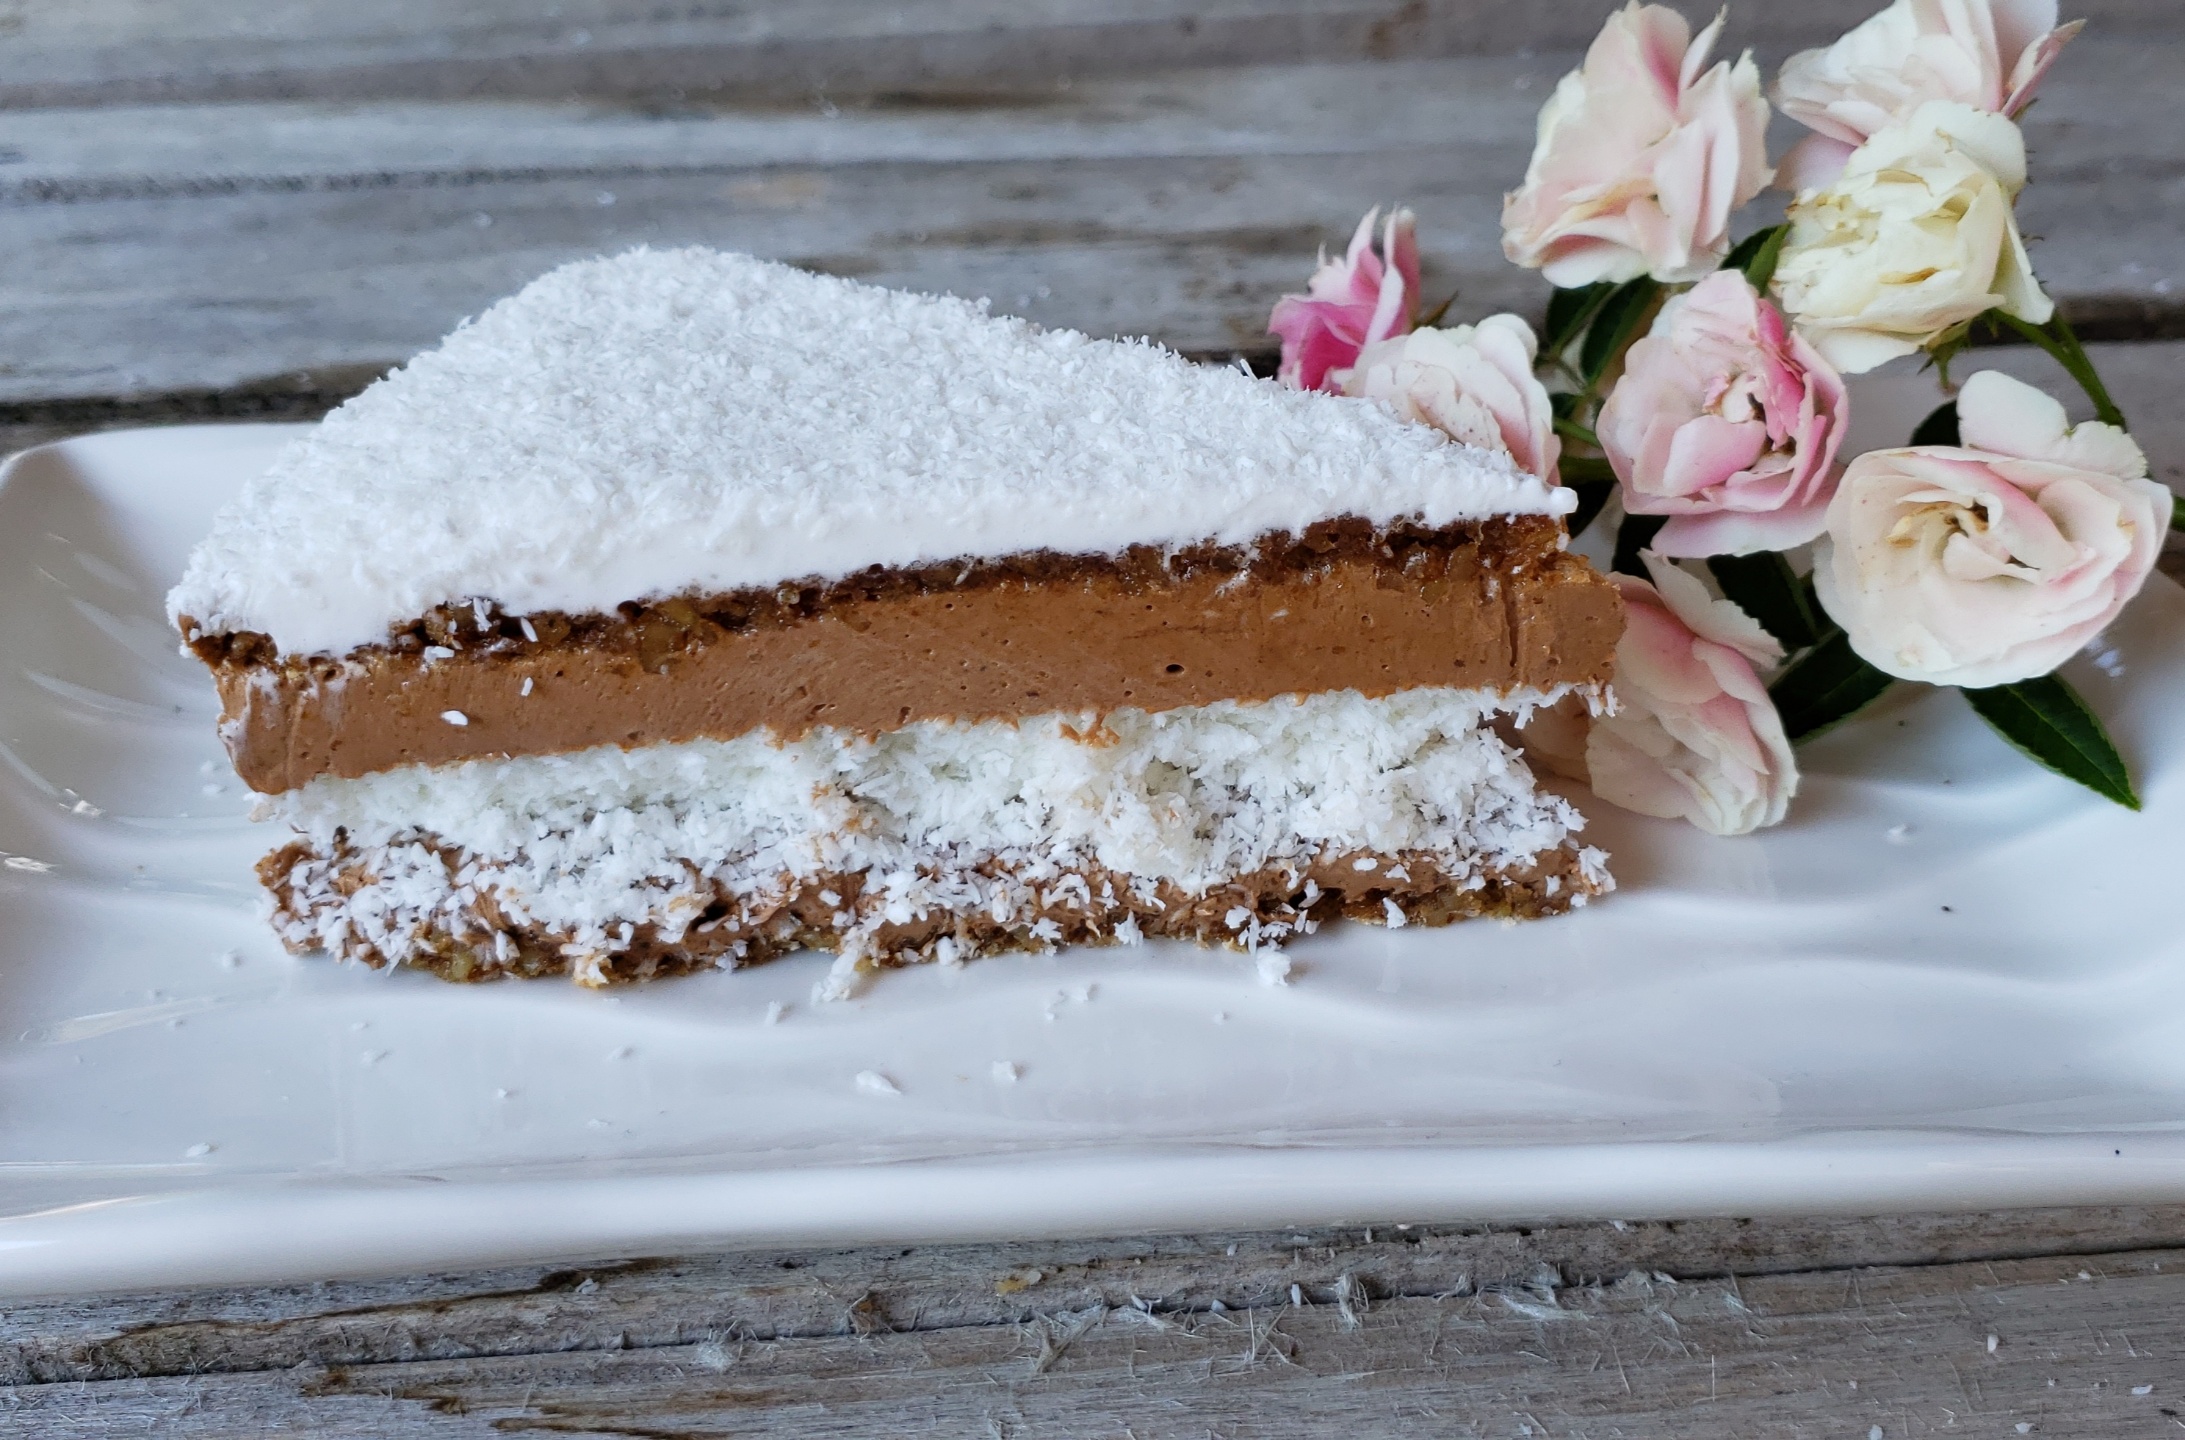 A piece of gluten free coconut cake, filled with chocolate filing, and coconut filing